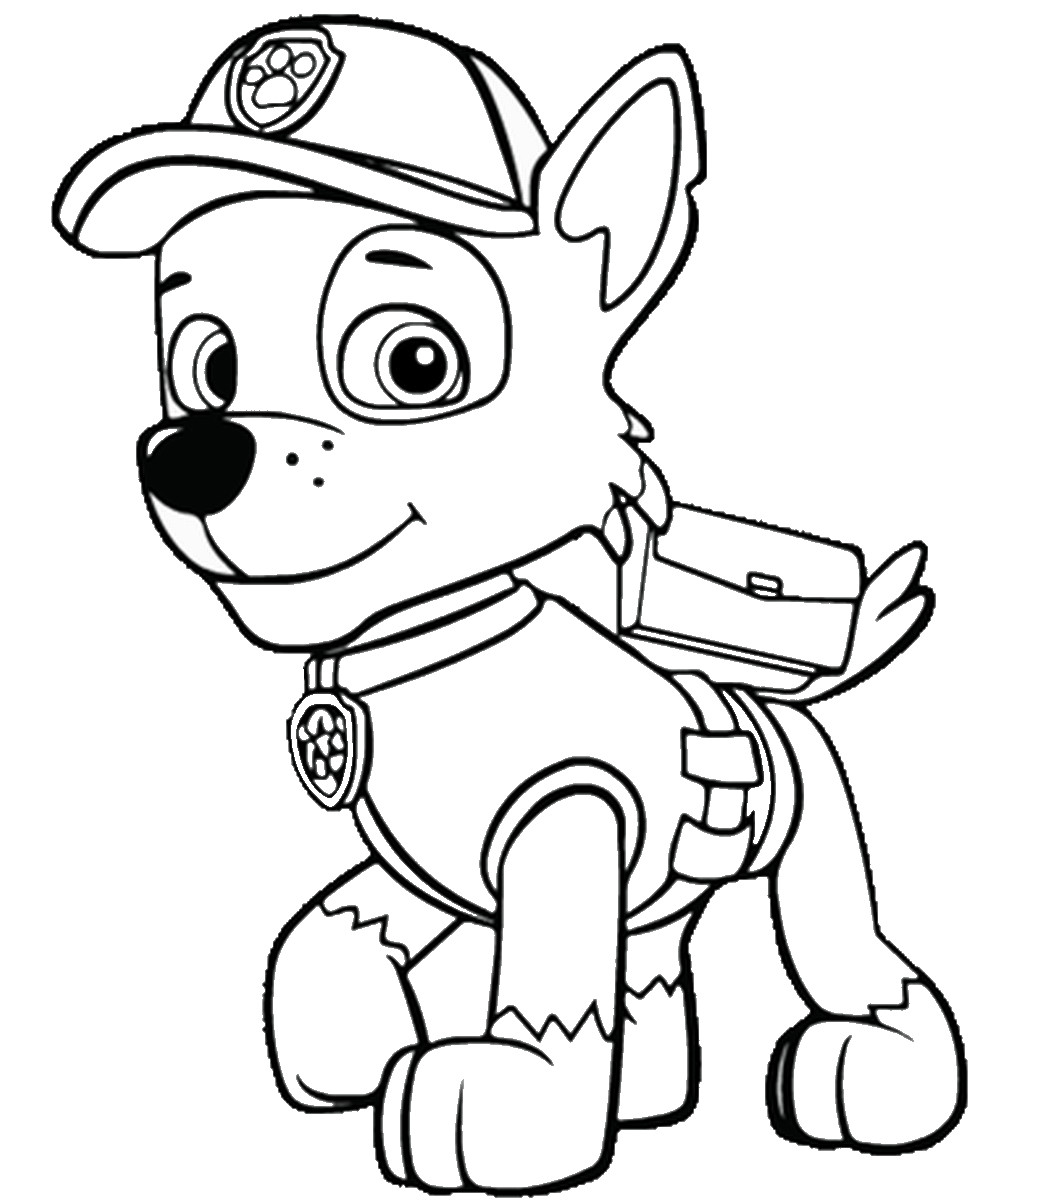 Paw Patrol Printable Coloring Pages
 Top 10 PAW Patrol Coloring Pages 2017